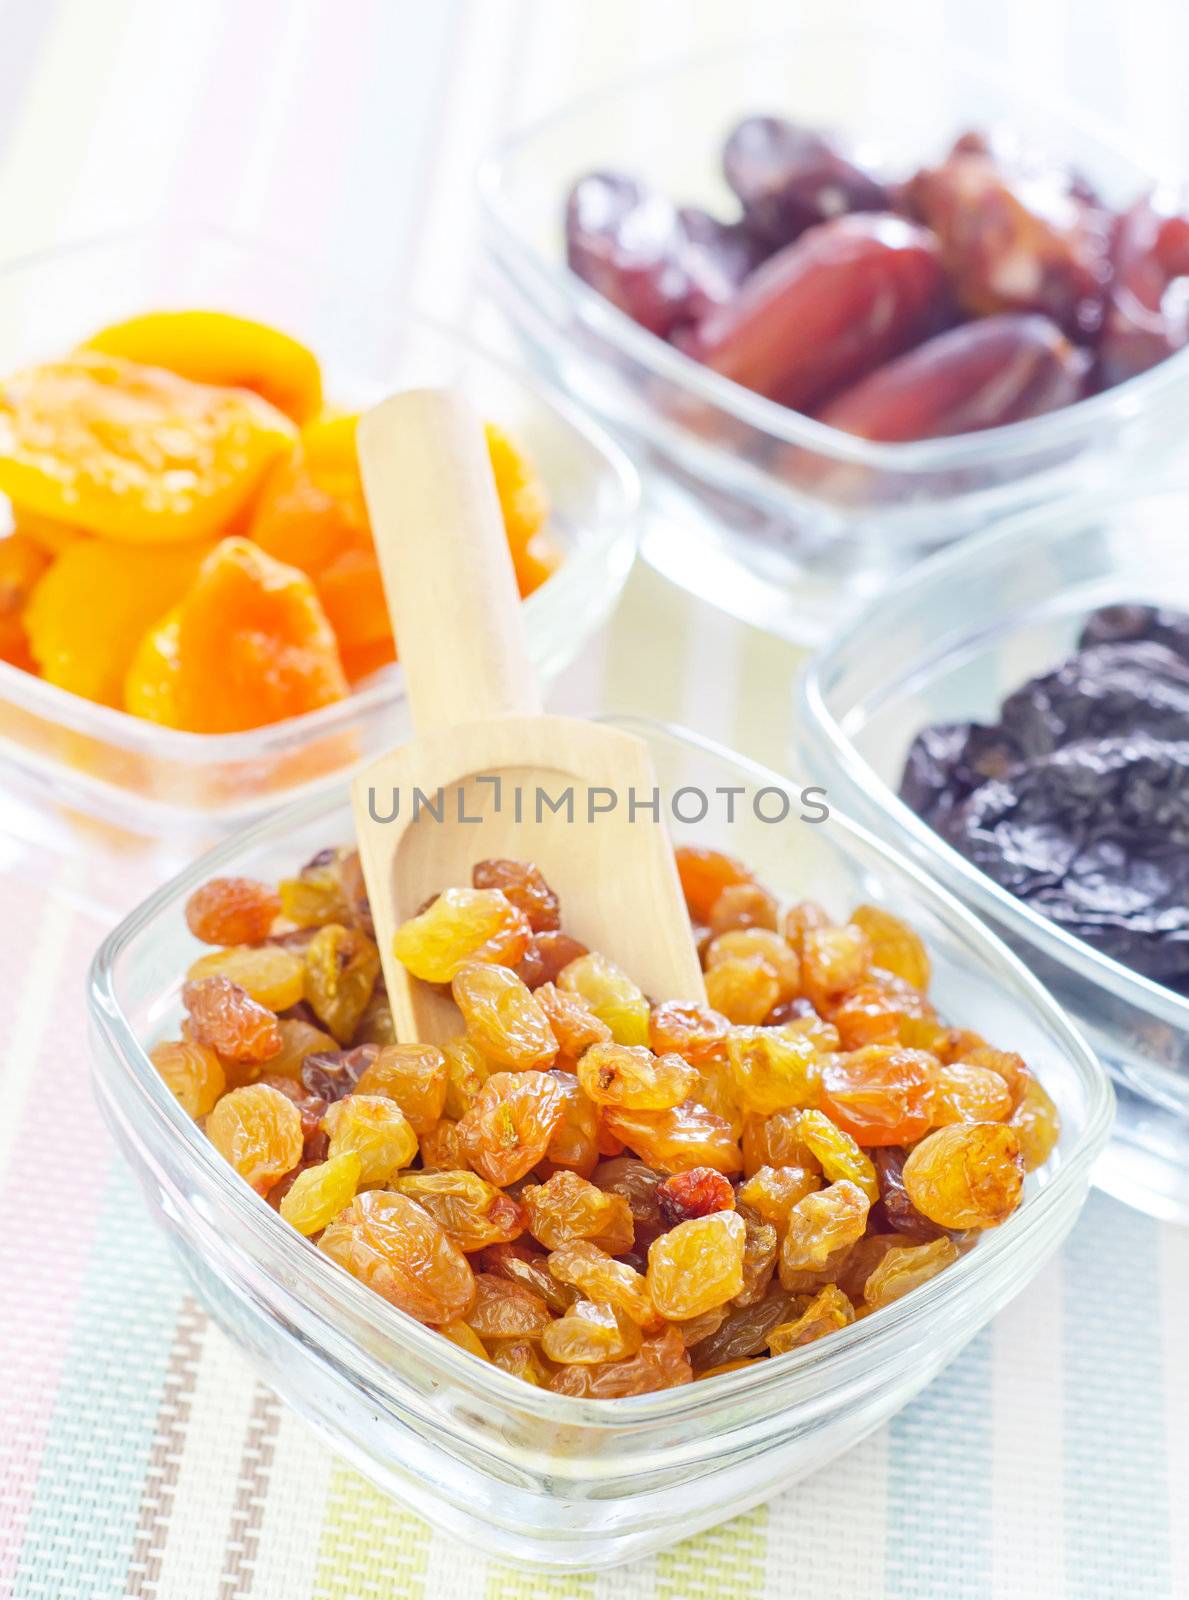 dried apricots, raisins and dates